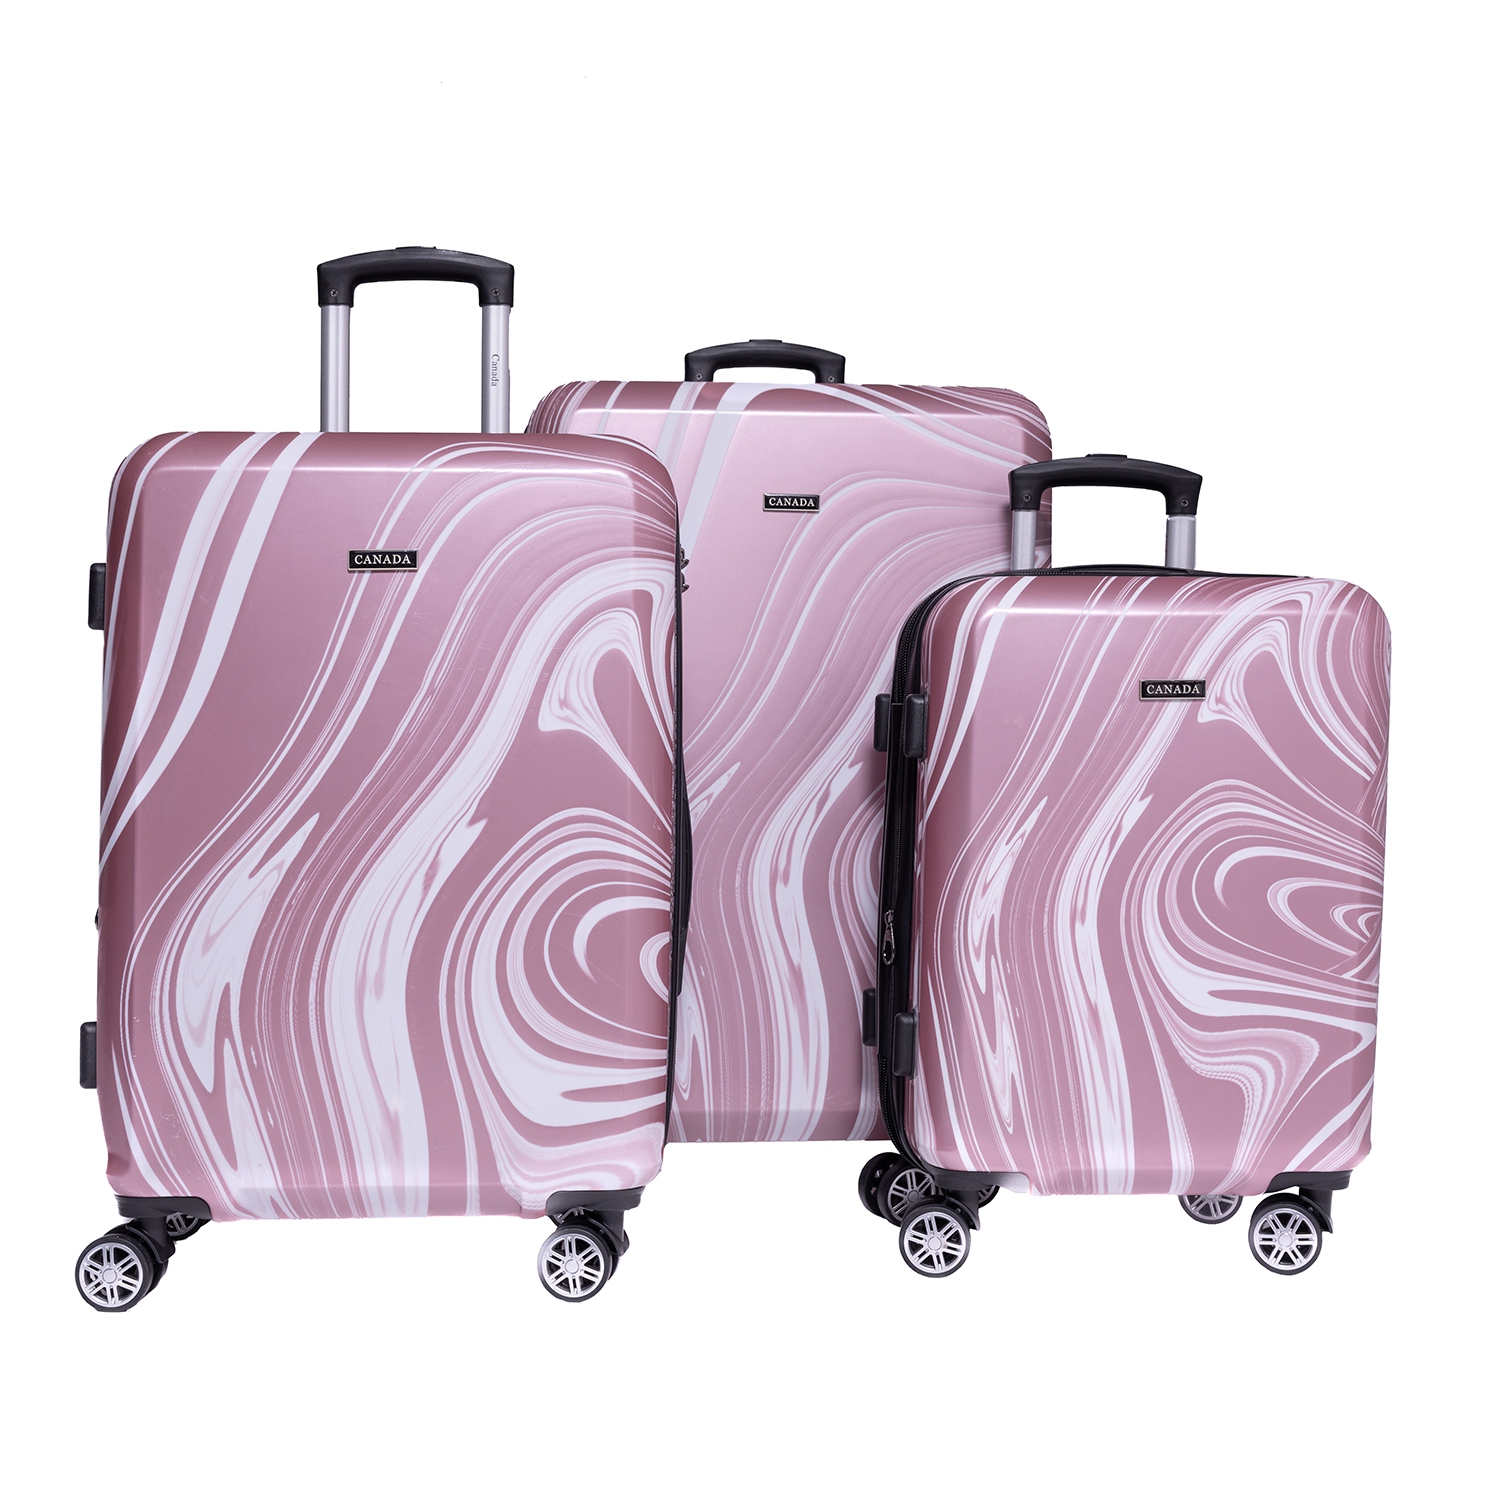 CANADA Set of 3 POLYCARBONAT Hard Side Suitcases with Integrated TSA Lock